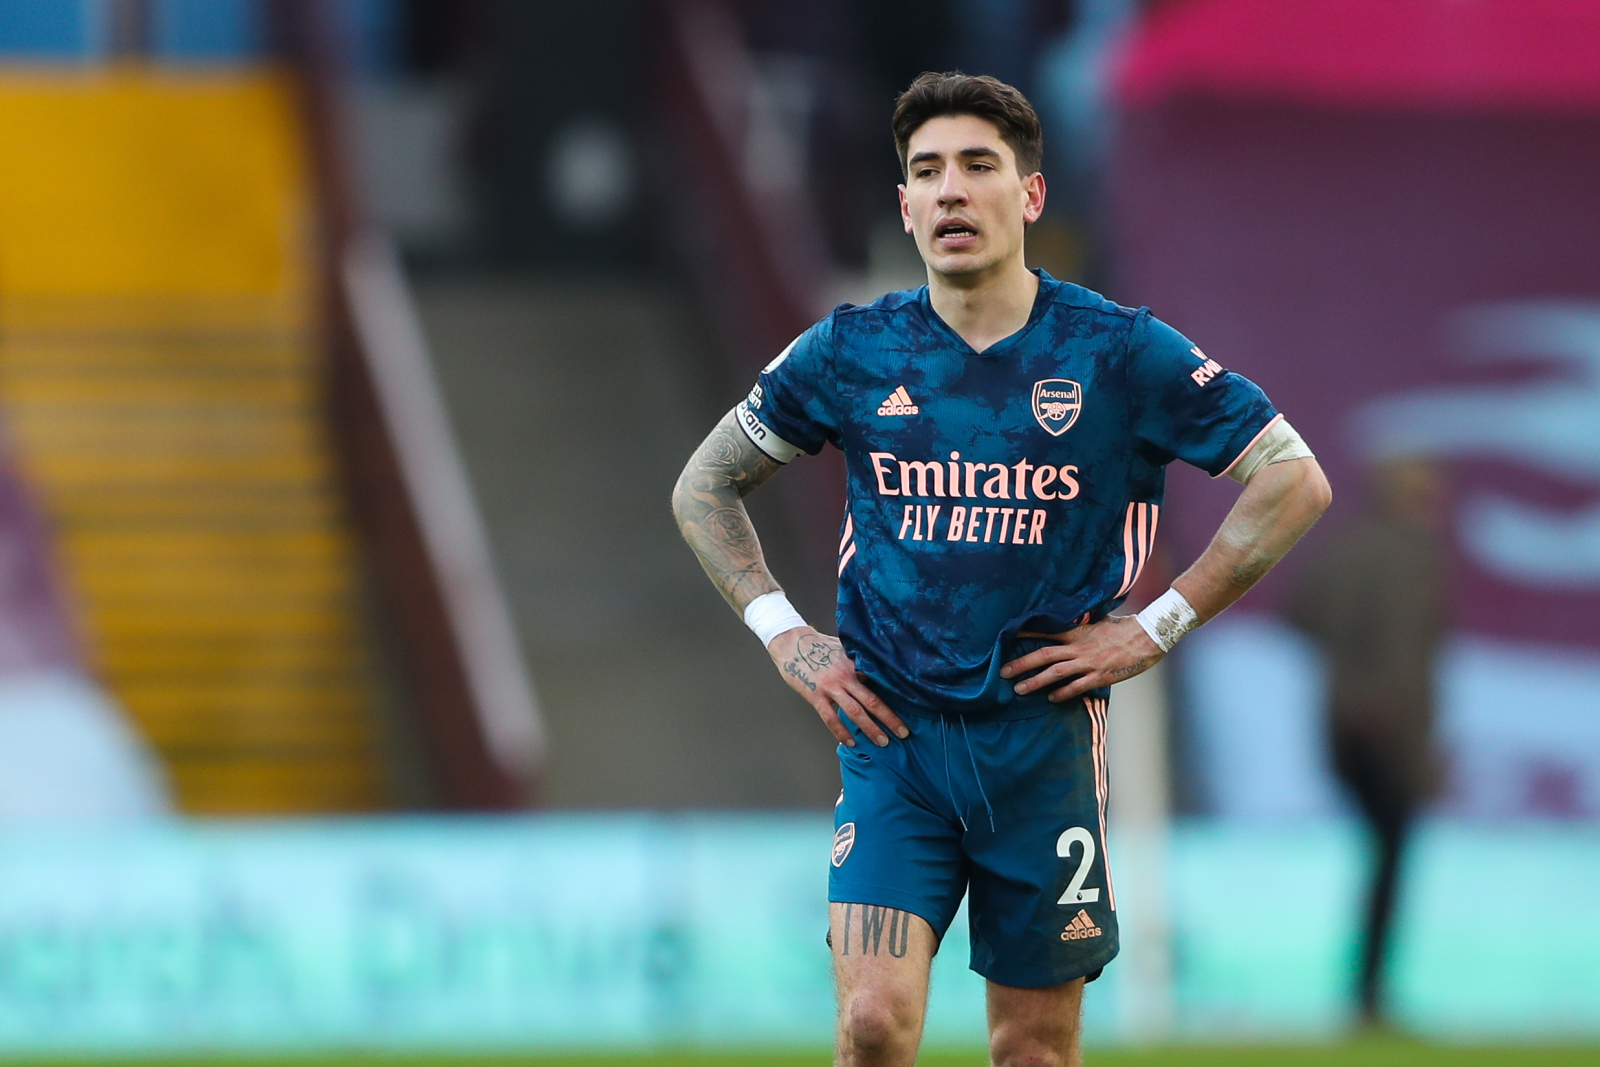 Arsenal's Hector Bellerin Shows His Style Off The Pitch